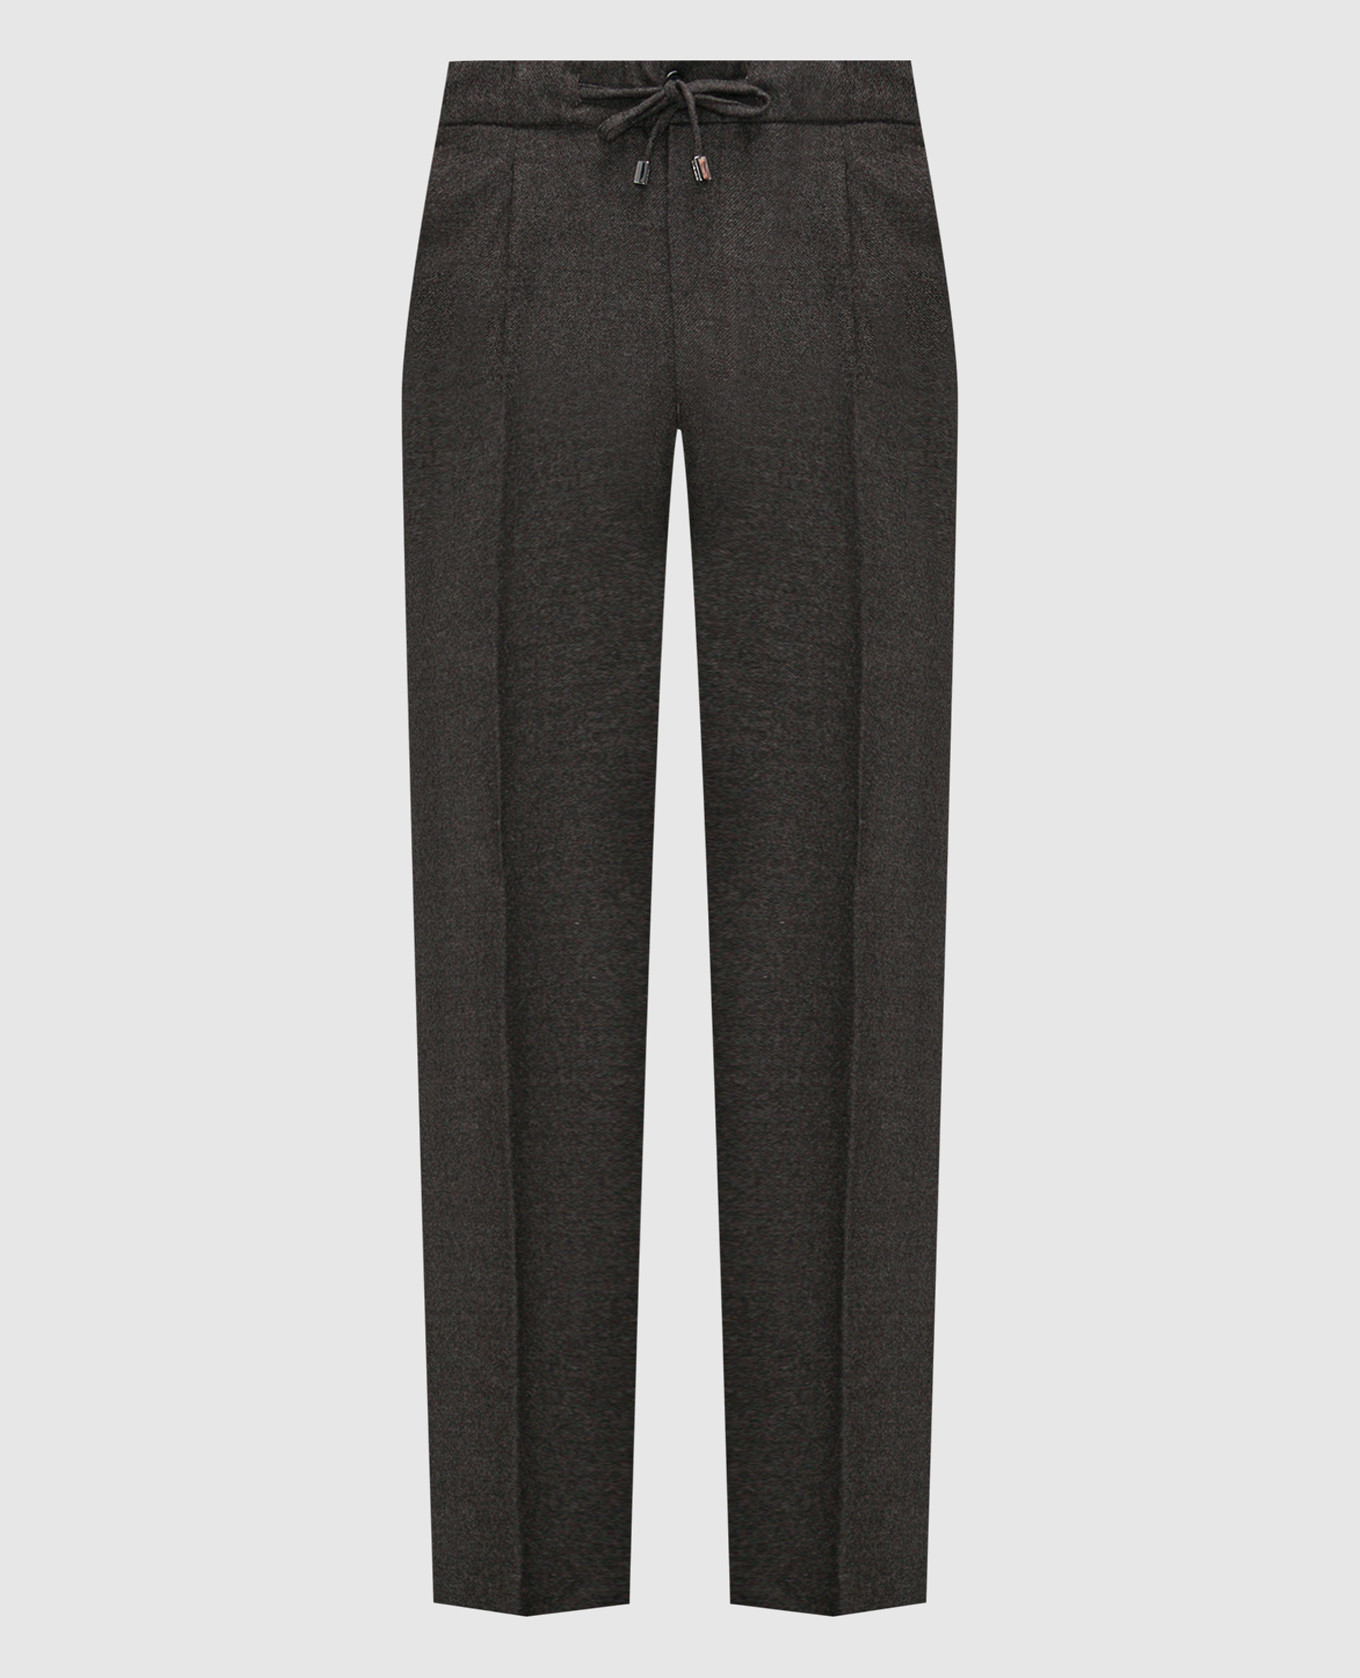 Brown wool and cashmere trousers